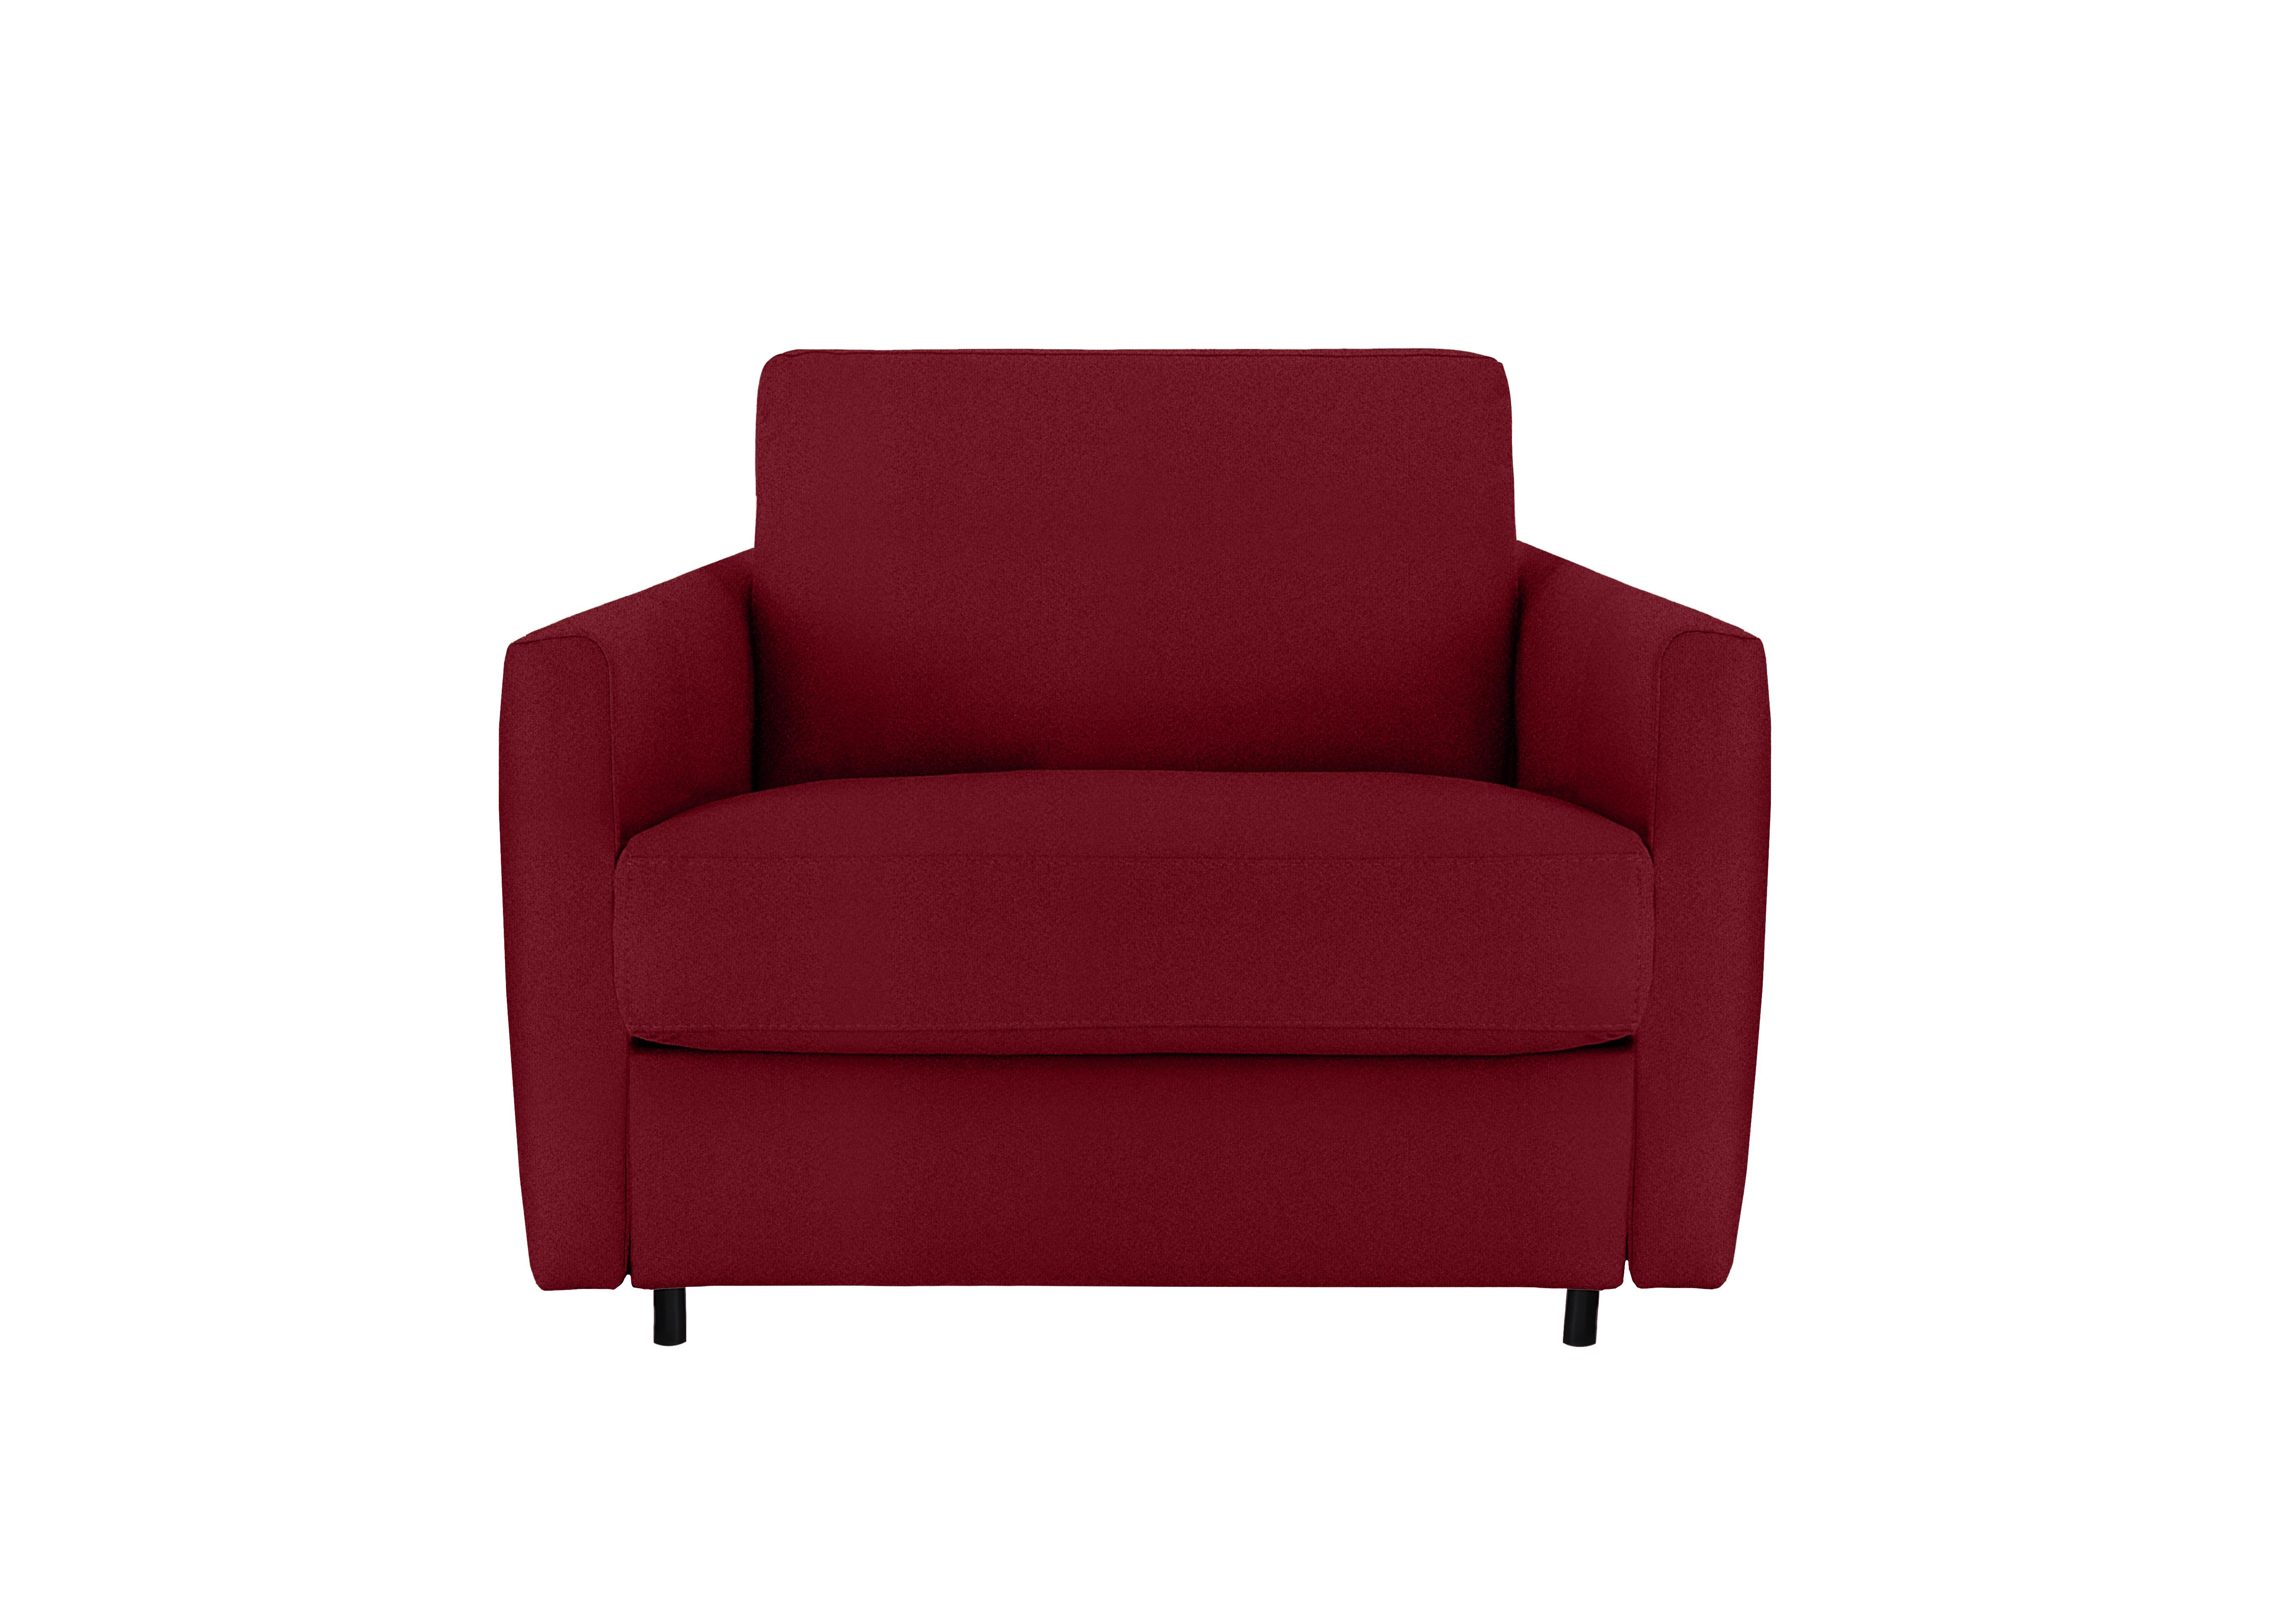 Alcova Fabric Chair Sofa Bed with Slim Arms in Coupe Rosso 305 on Furniture Village